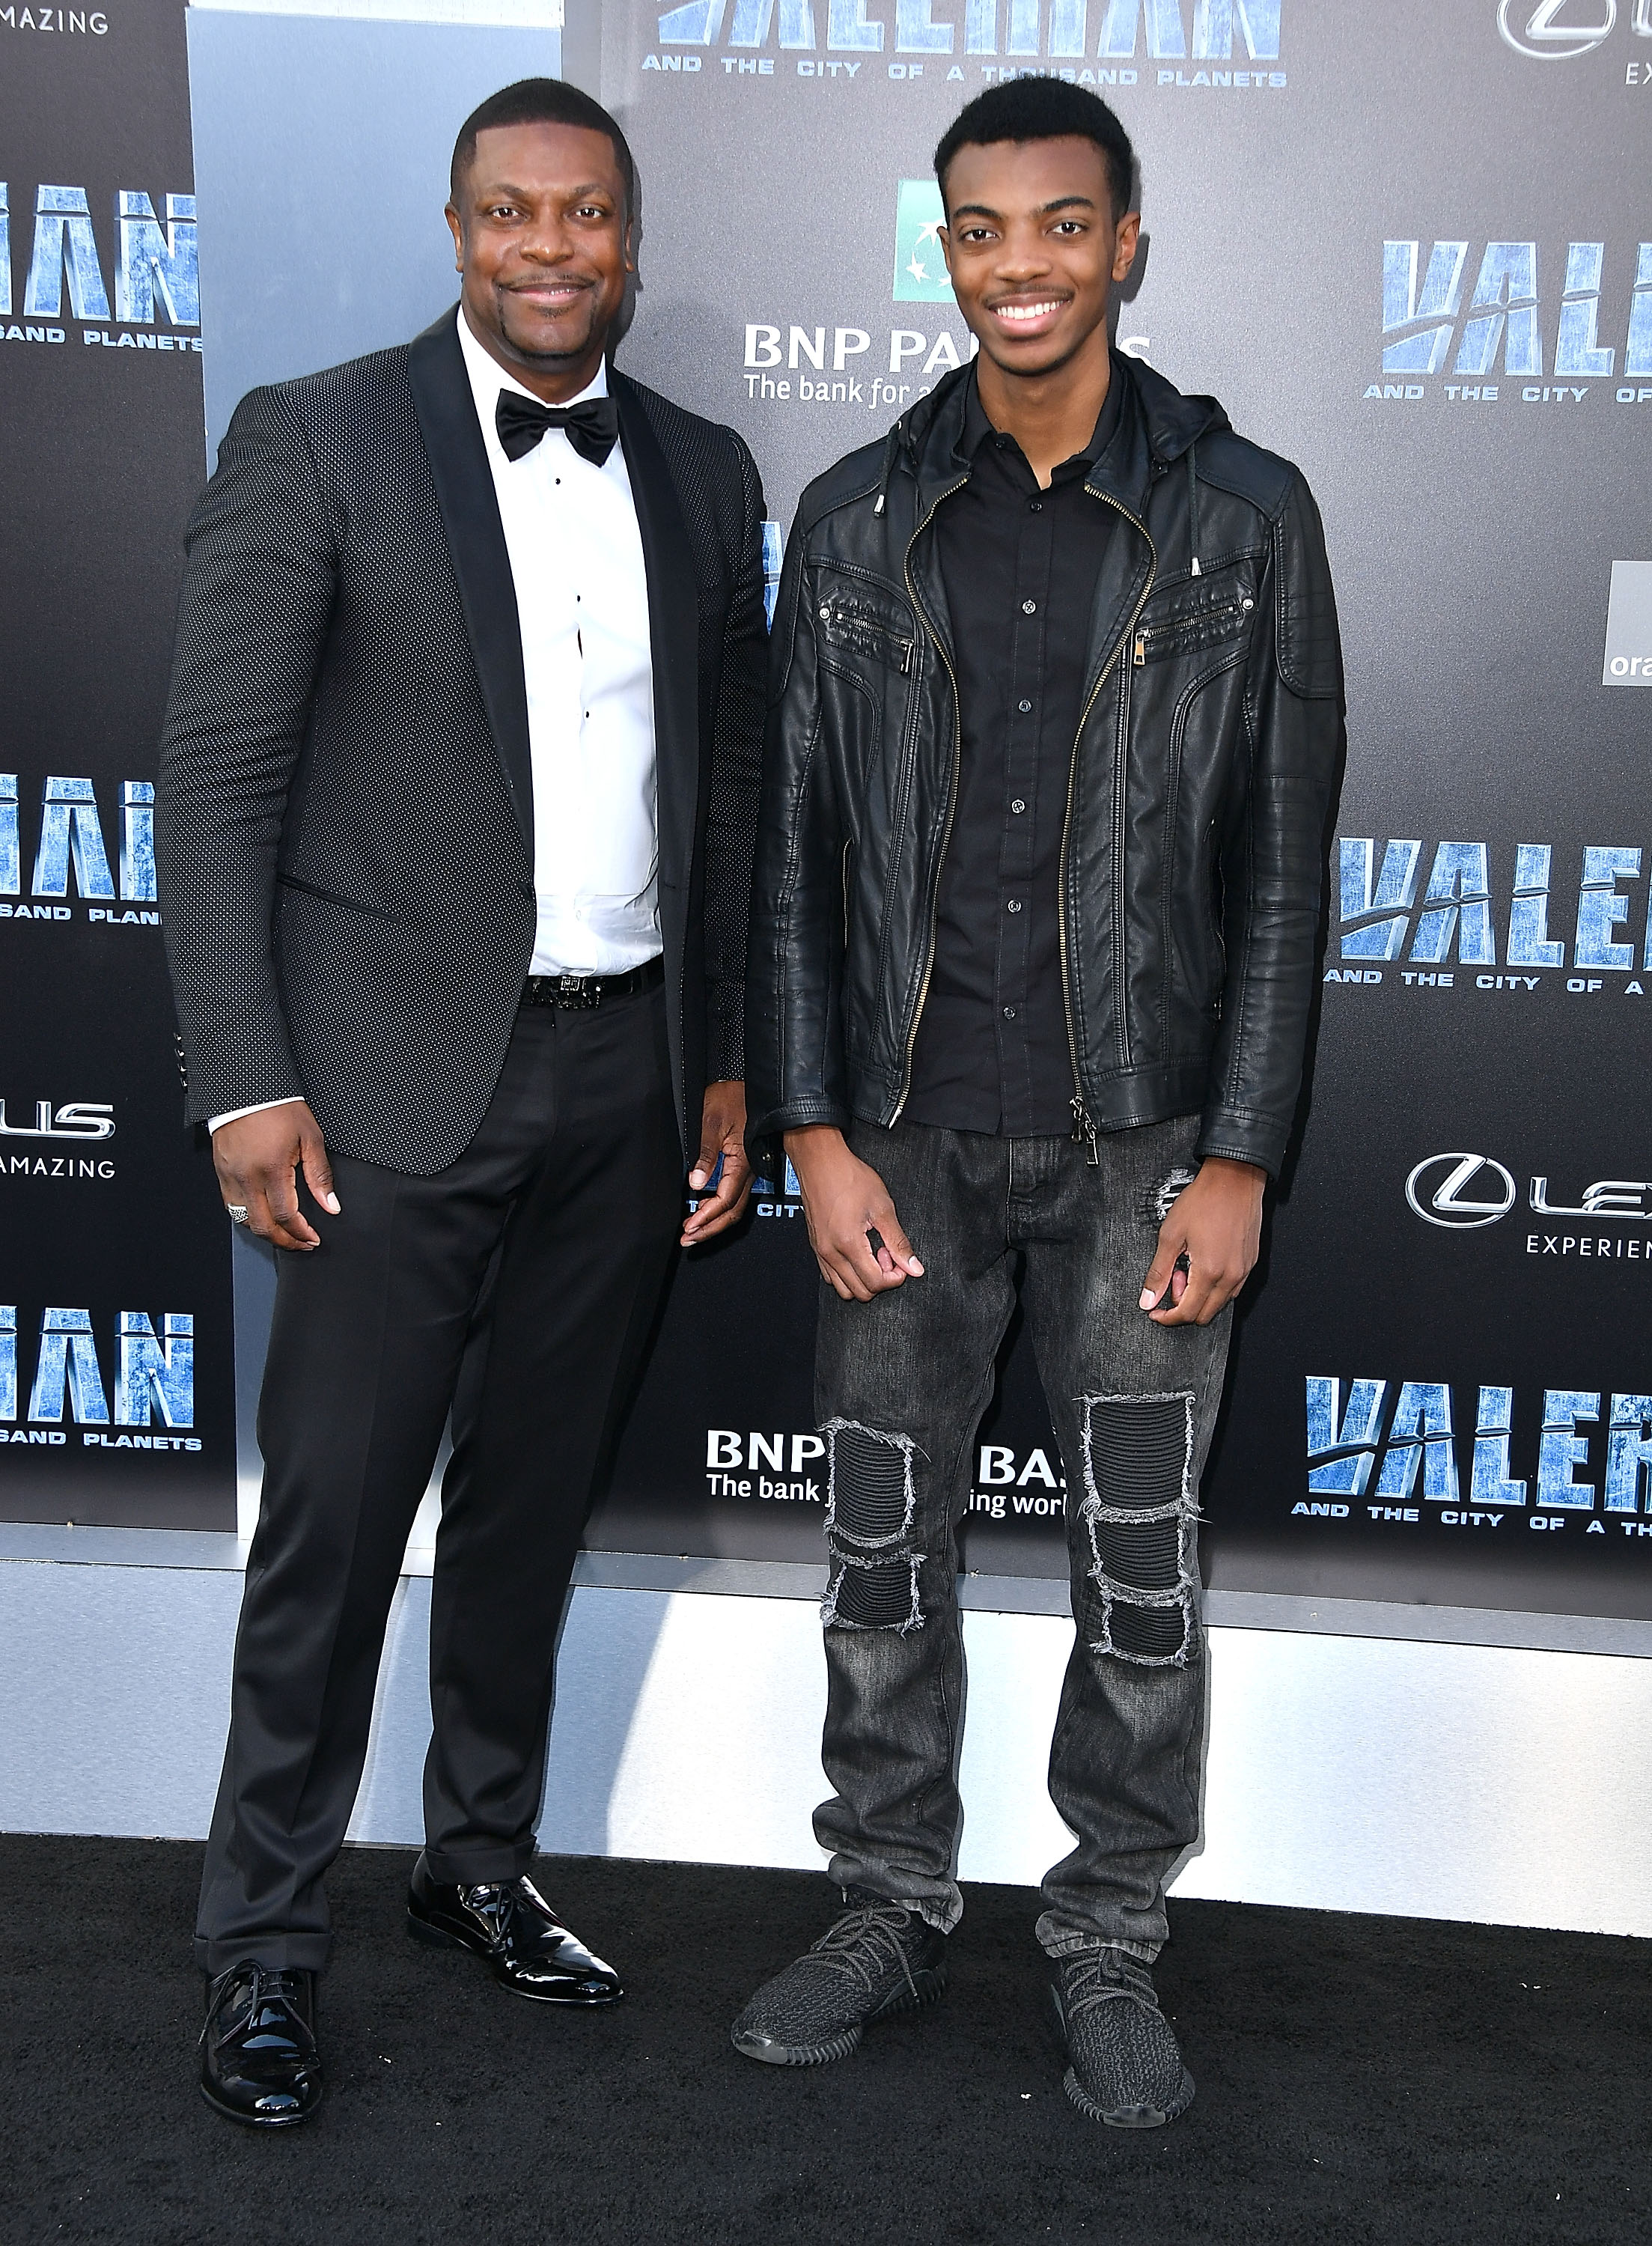 Chris Tucker and Destin Christopher during the premiere of EuropaCorp And STX Entertainment's "Valerian And The City Of A Thousand Planets" at TCL Chinese Theatre on July 17, 2017, in Hollywood, California. | Source: Getty Images